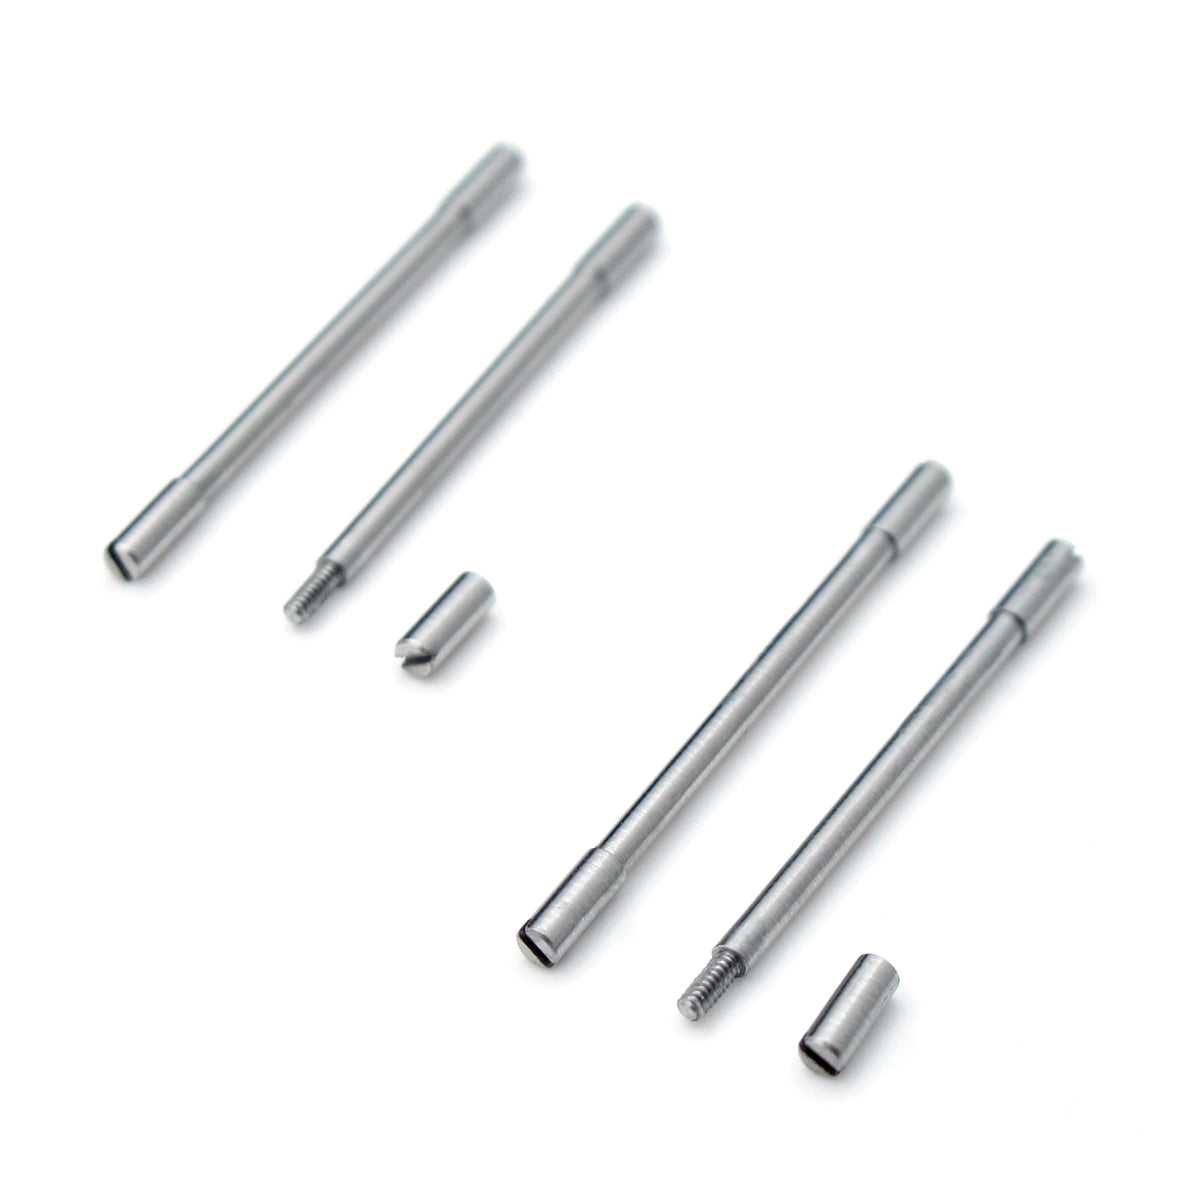 Screw-in Lug Bars Pins for Audemars Piguet Royal Oak Offshore Leather Watch Band Strapcode Partss